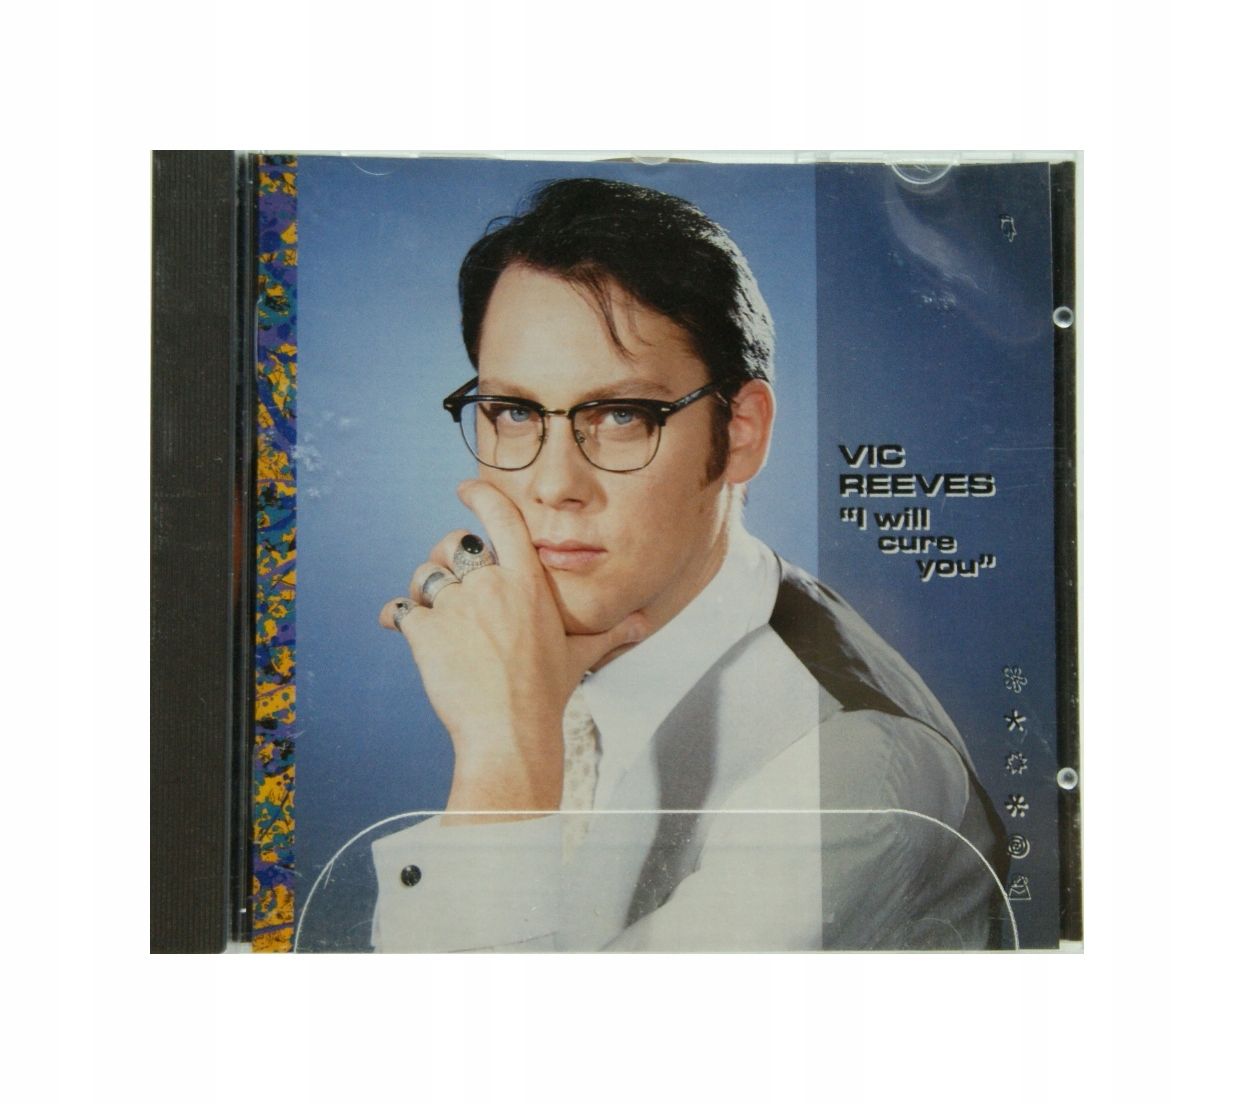 Cd - Vic Reeves - I Will Cure You